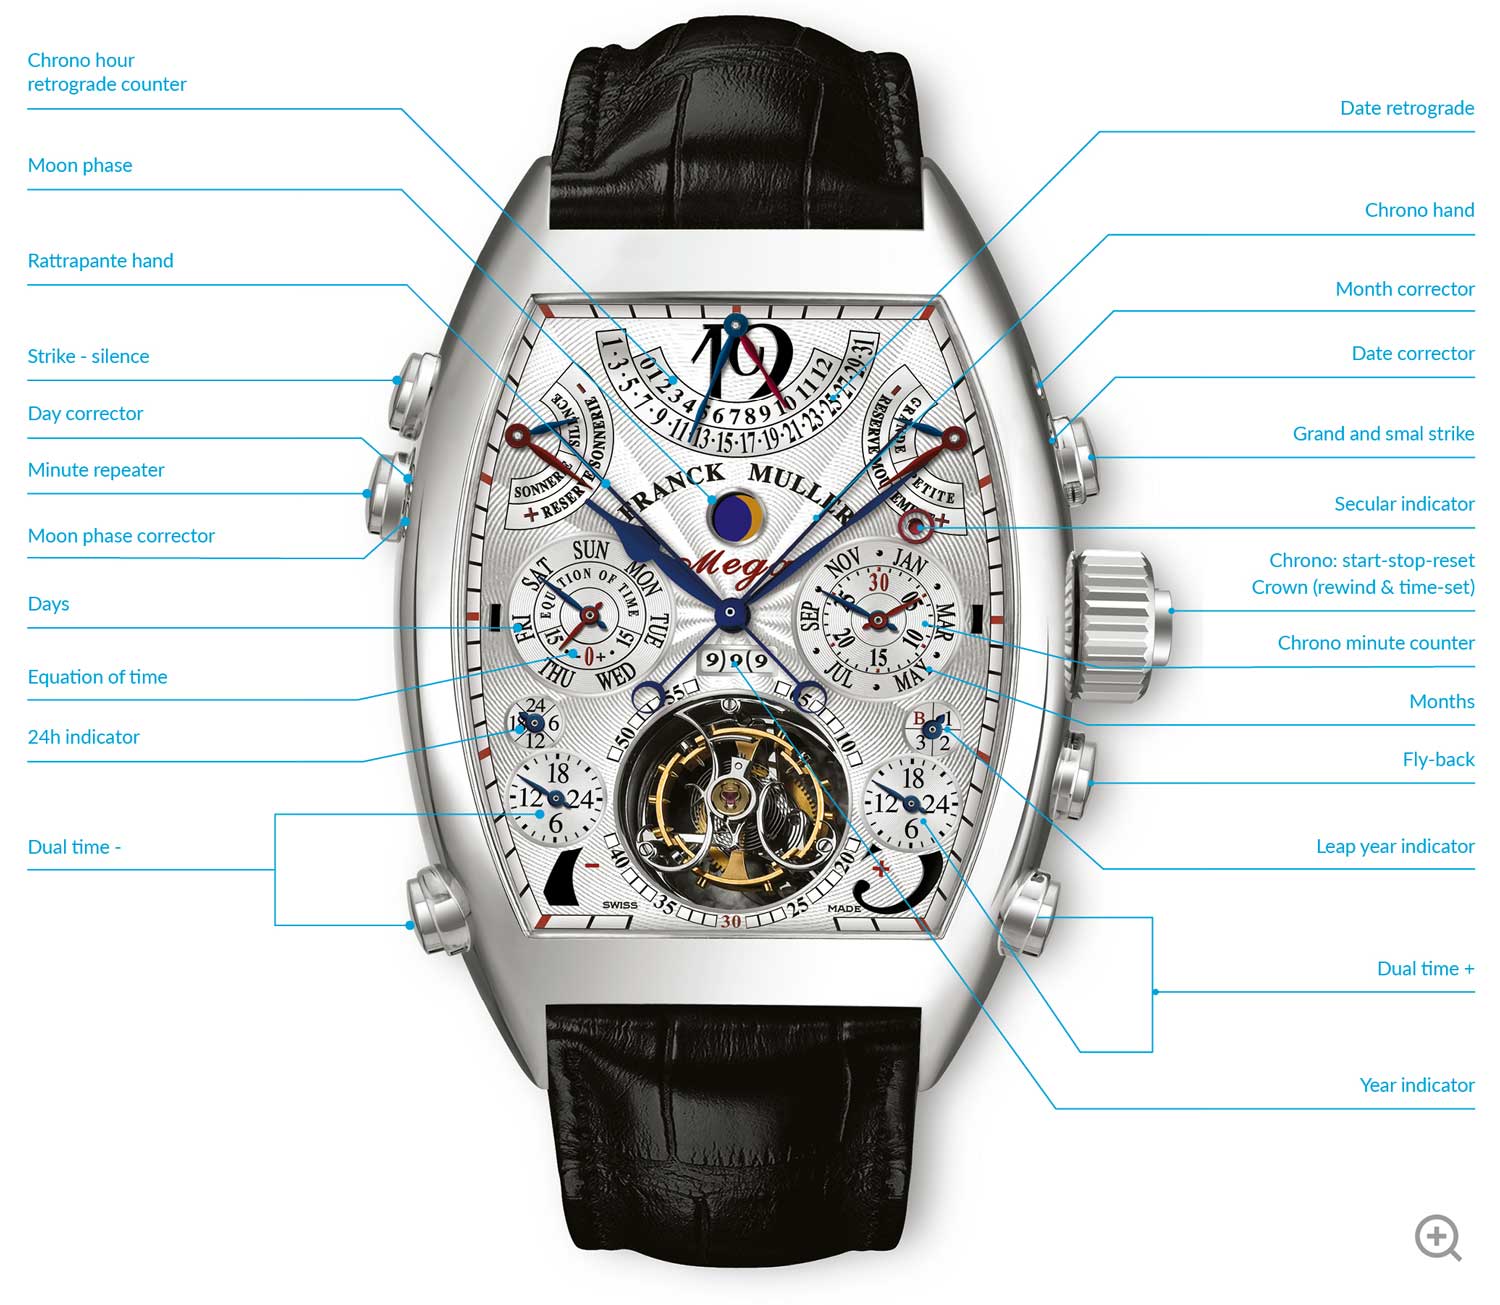 The Aeternitas Mega 4 boasts a staggering 36 complications, 25 of which are visible on the dial